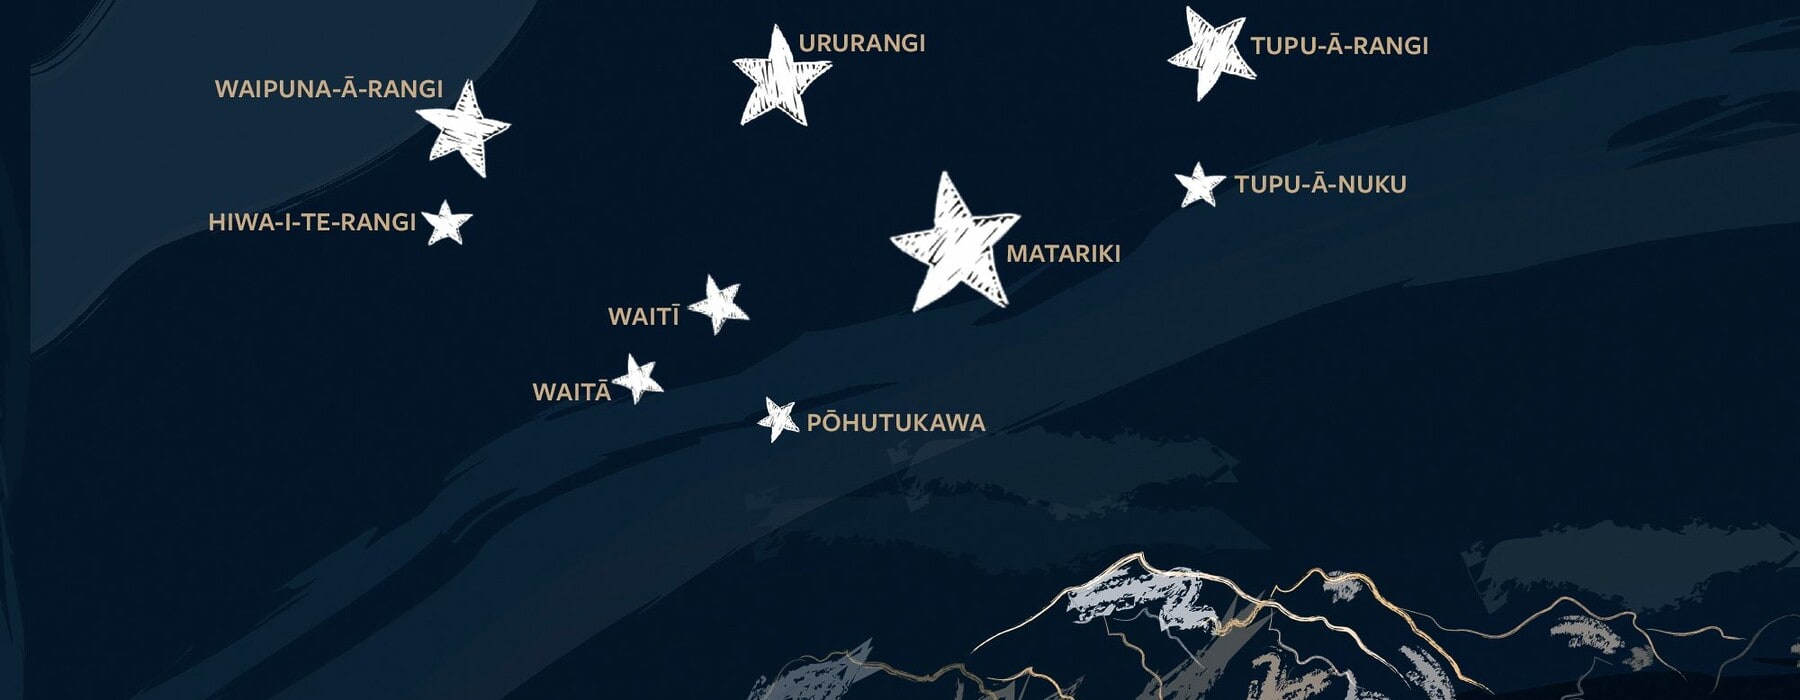 Illustration of mountains and a night sky with white Matariki stars